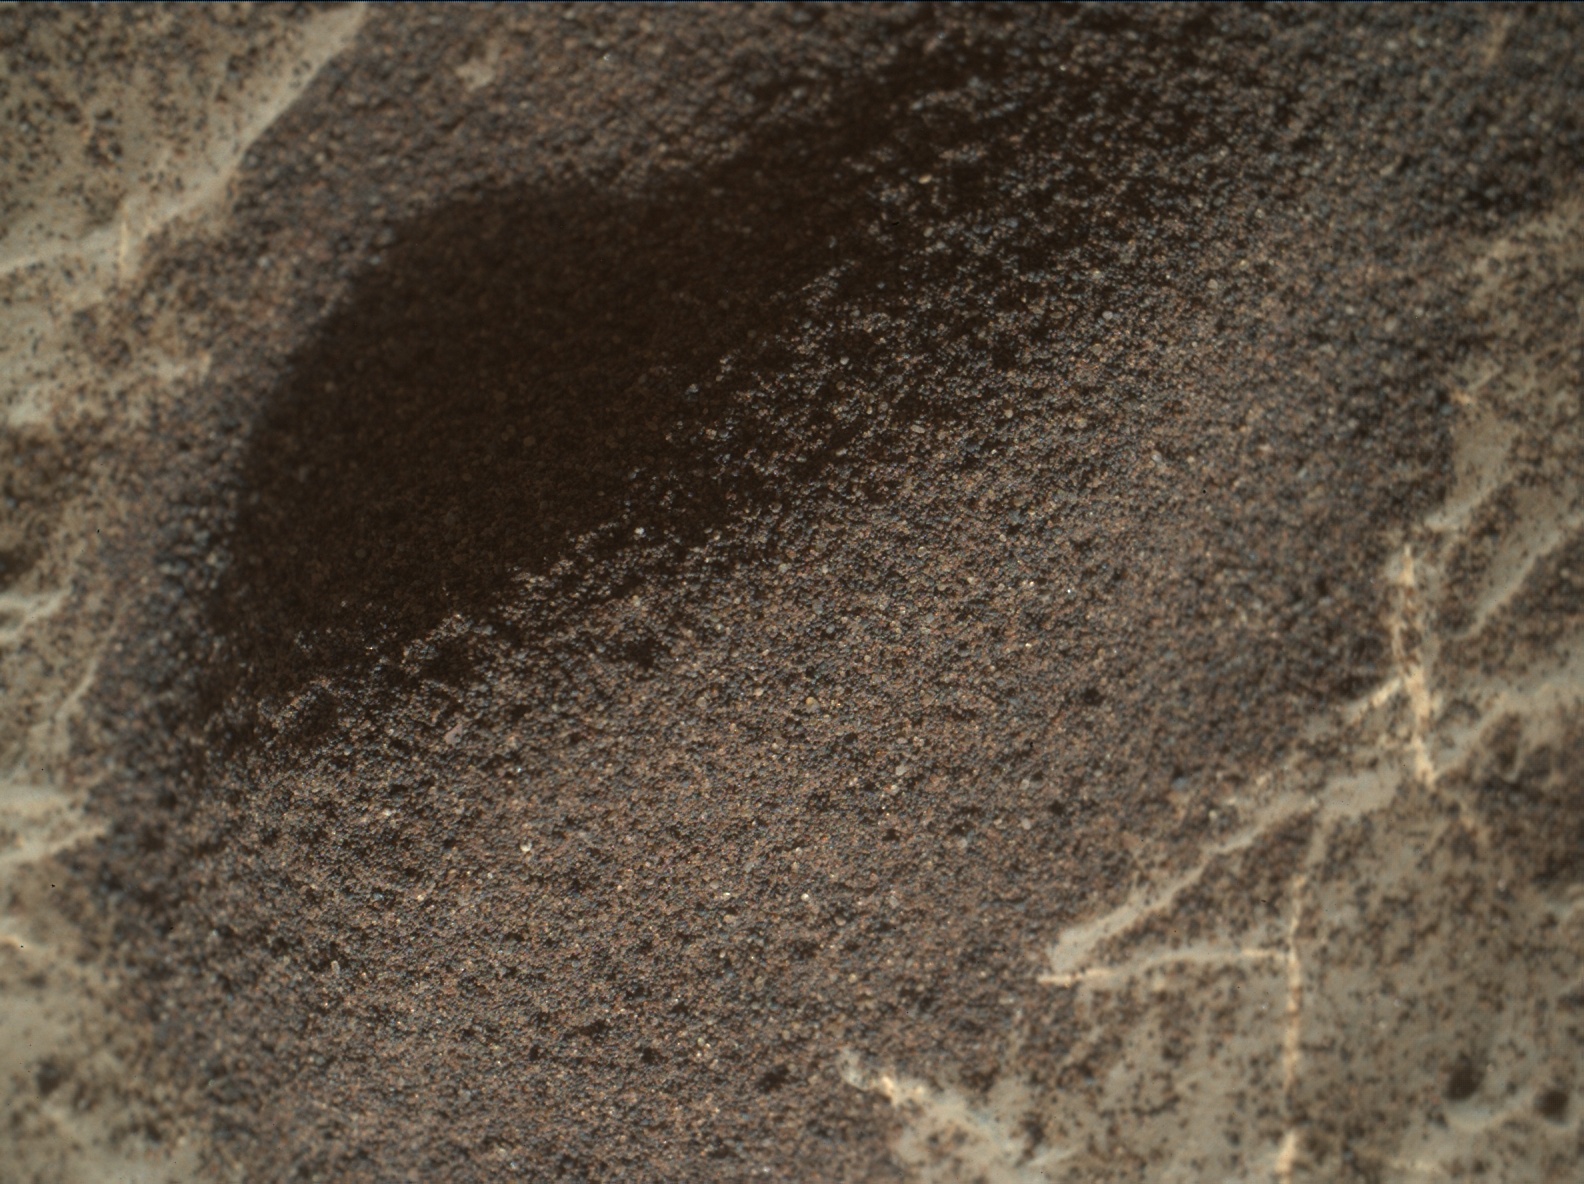 Nasa's Mars rover Curiosity acquired this image using its Mars Hand Lens Imager (MAHLI) on Sol 1971